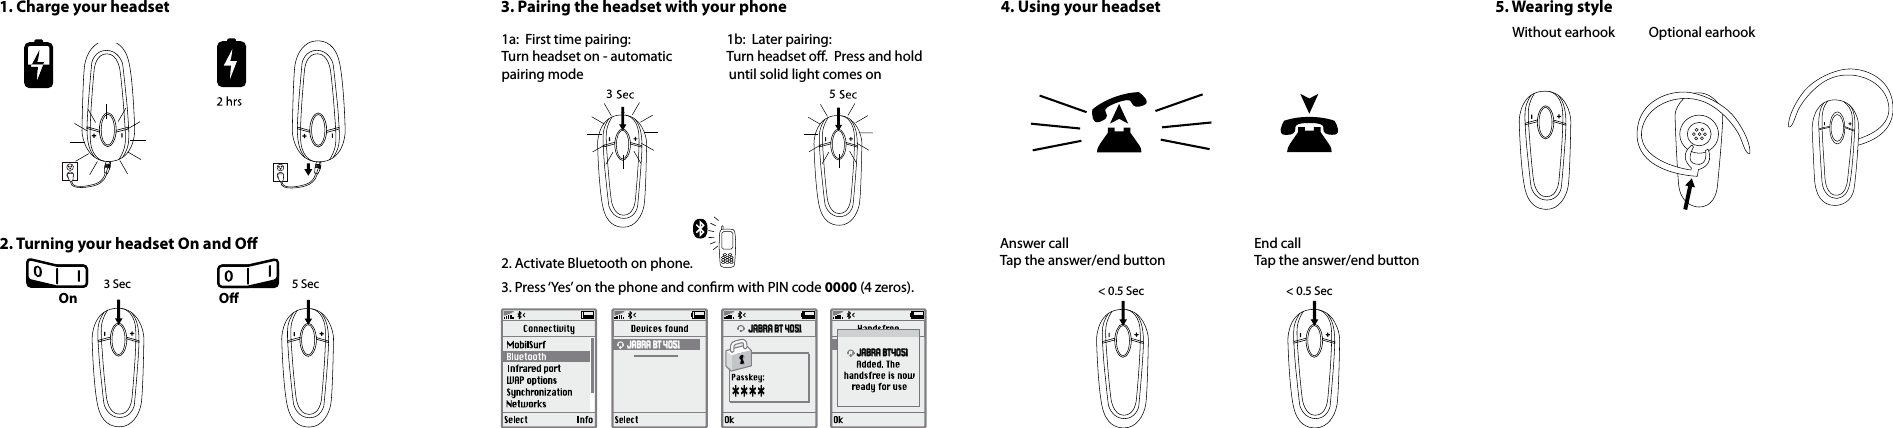 1. Charge your headset 3. Pairing the headset with your phone2. Activate Bluetooth on phone.3. Press ‘Yes’ on the phone and conrm with PIN code 0000 (4 zeros).1a:  First time pairing:                               1b:  Later pairing:Turn headset on - automatic  Turn headset o.  Press and hold  pairing mode                                               until solid light comes on2. Turning your headset On and O4. Using your headset 5. Wearing style    Without earhook           Optional earhookOn O3 Sec3 55 SecAnswer call  End callTap the answer/end button  Tap the answer/end button&lt; 0.5 Sec &lt; 0.5 SecJABRA BTx4051JABRA BT4051JABRA BTx4051